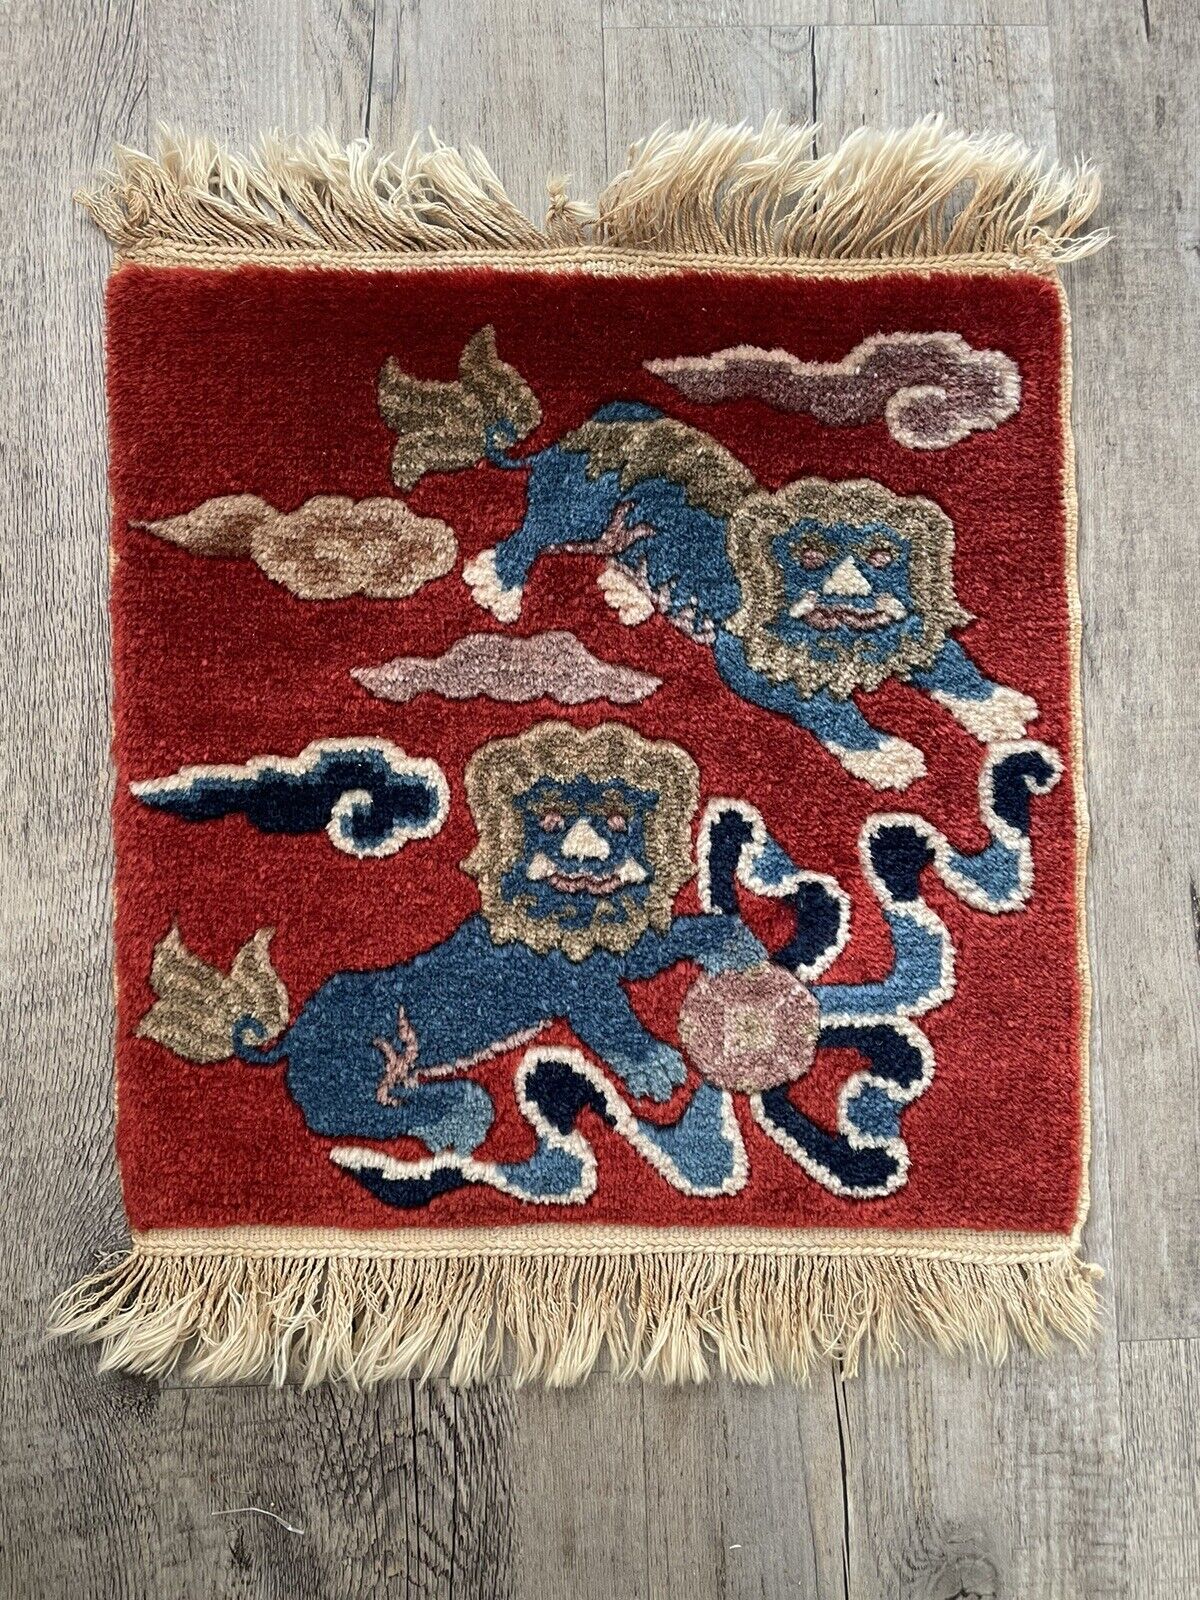 Close-up of vintage charm on Handmade Antique Art Deco Chinese Mat - Detailed view showcasing the vintage charm and appeal of the mat's design from the 1920s.